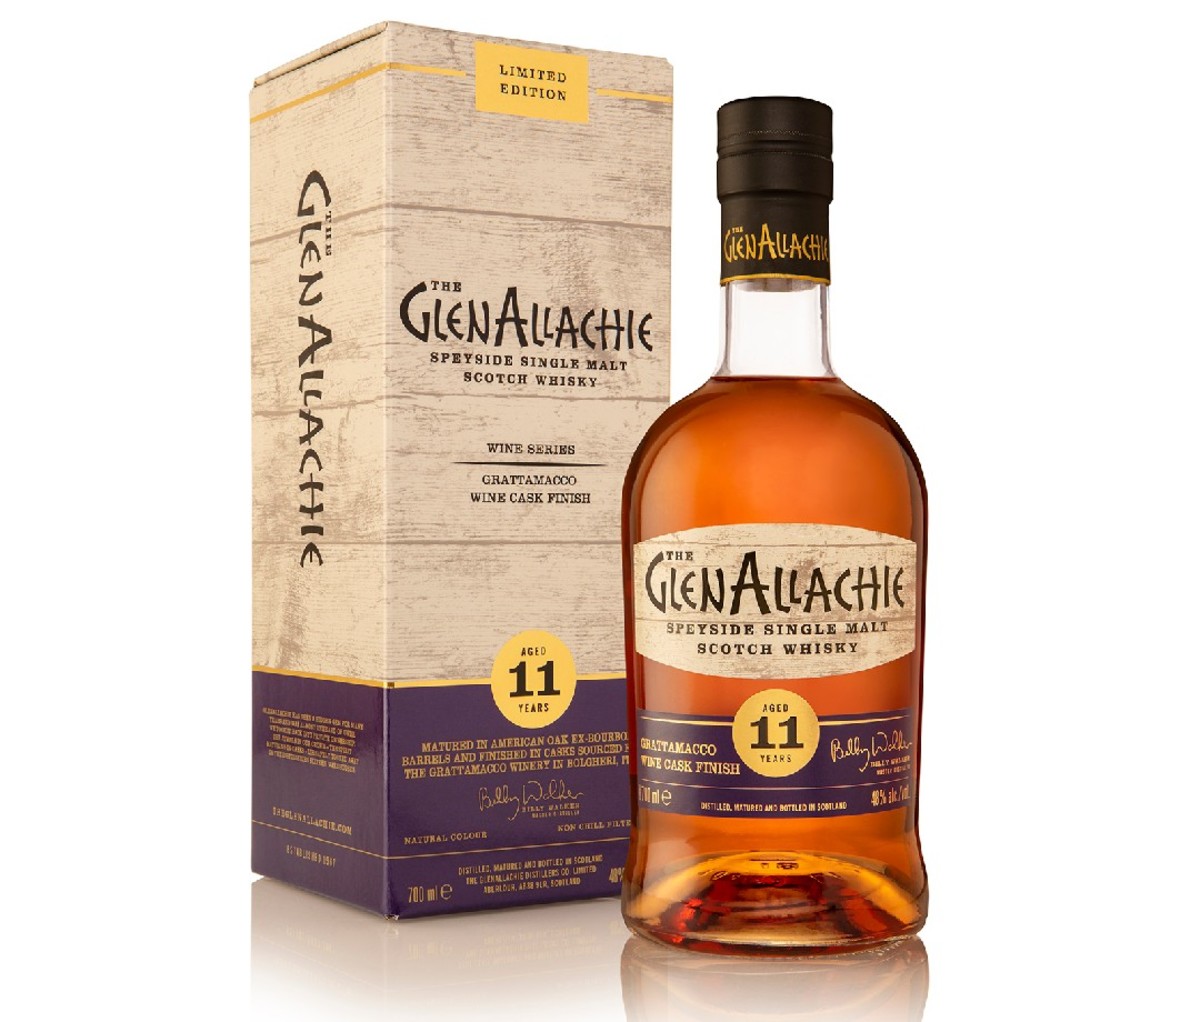 Bottle (and box container) of The GlenAllachie Speyside Single Malt Scotch Whisky, Aged 11 Years